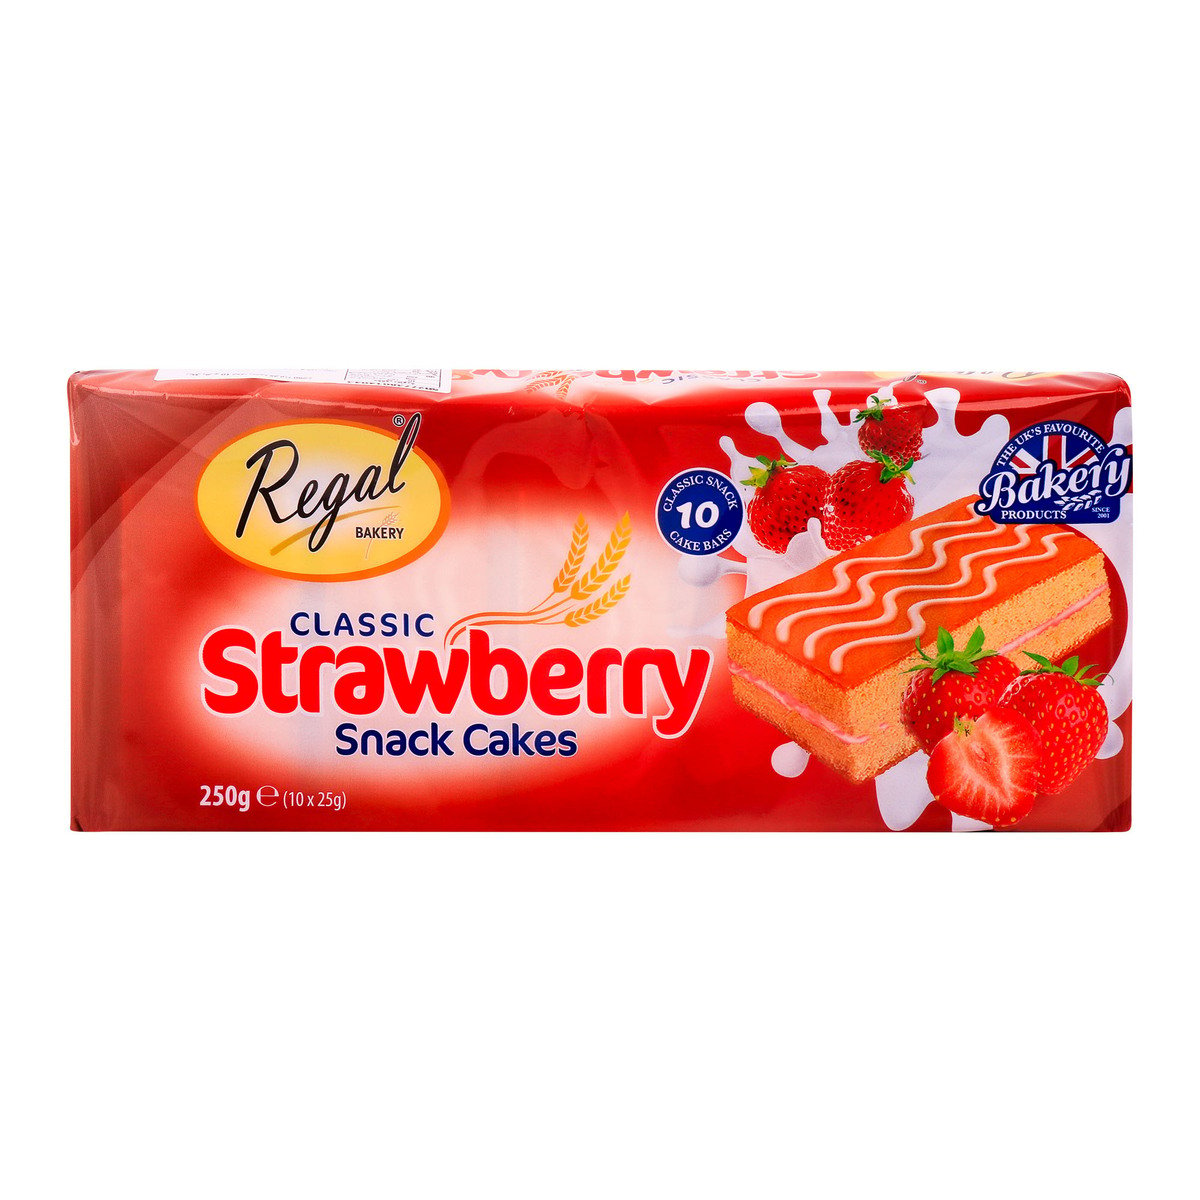 Regal Bakery Classic Strawberry Snack Cakes 10 pcs 250 g